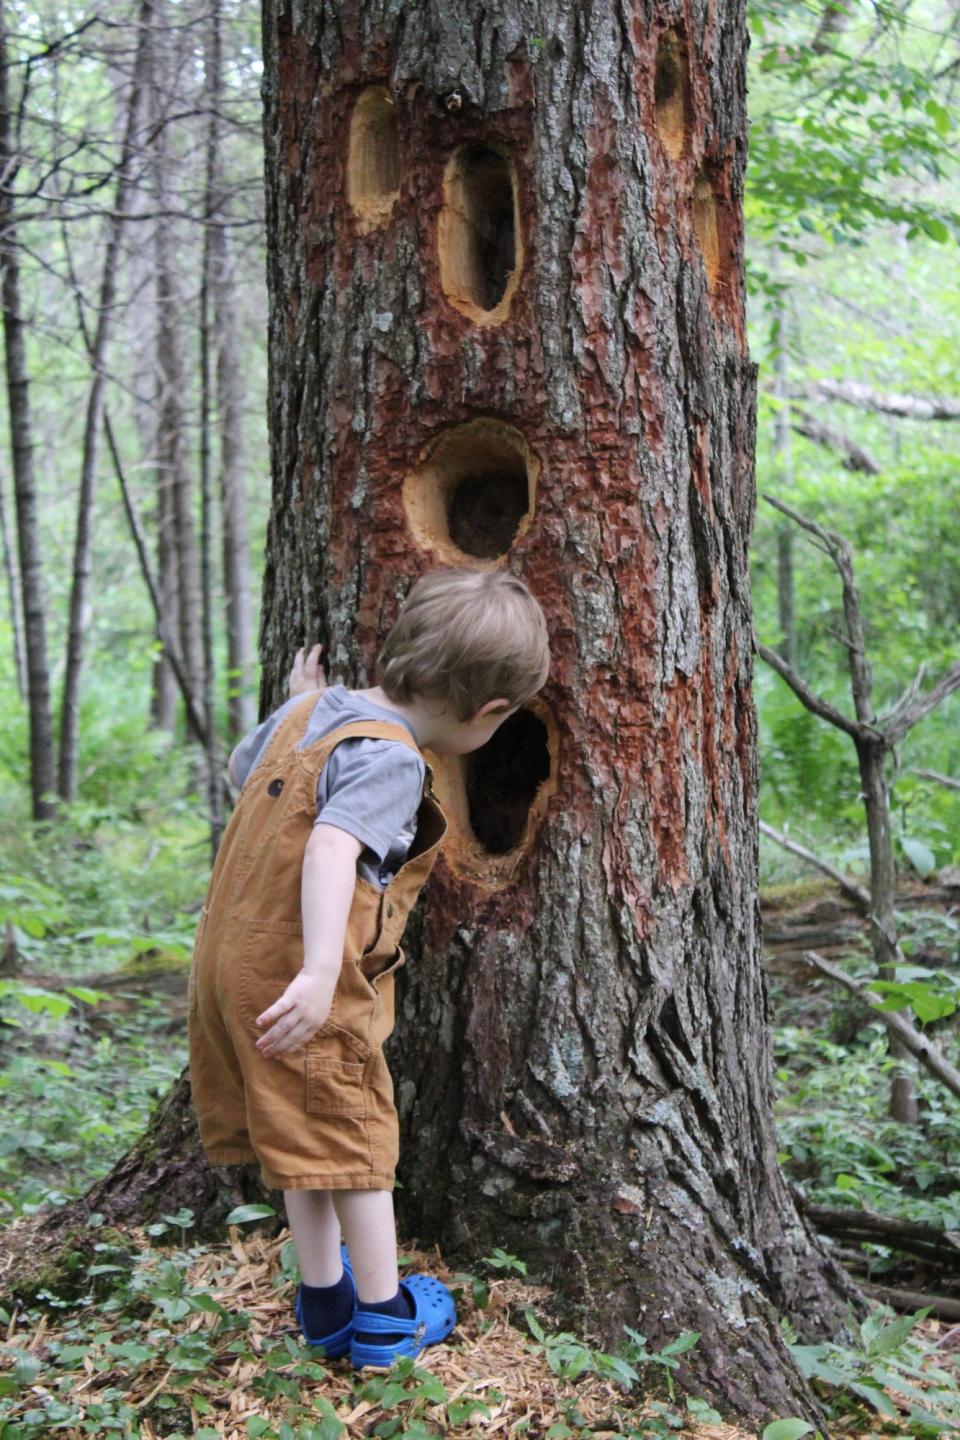 A toddler peers into woodpecker holes in a tree trunk.